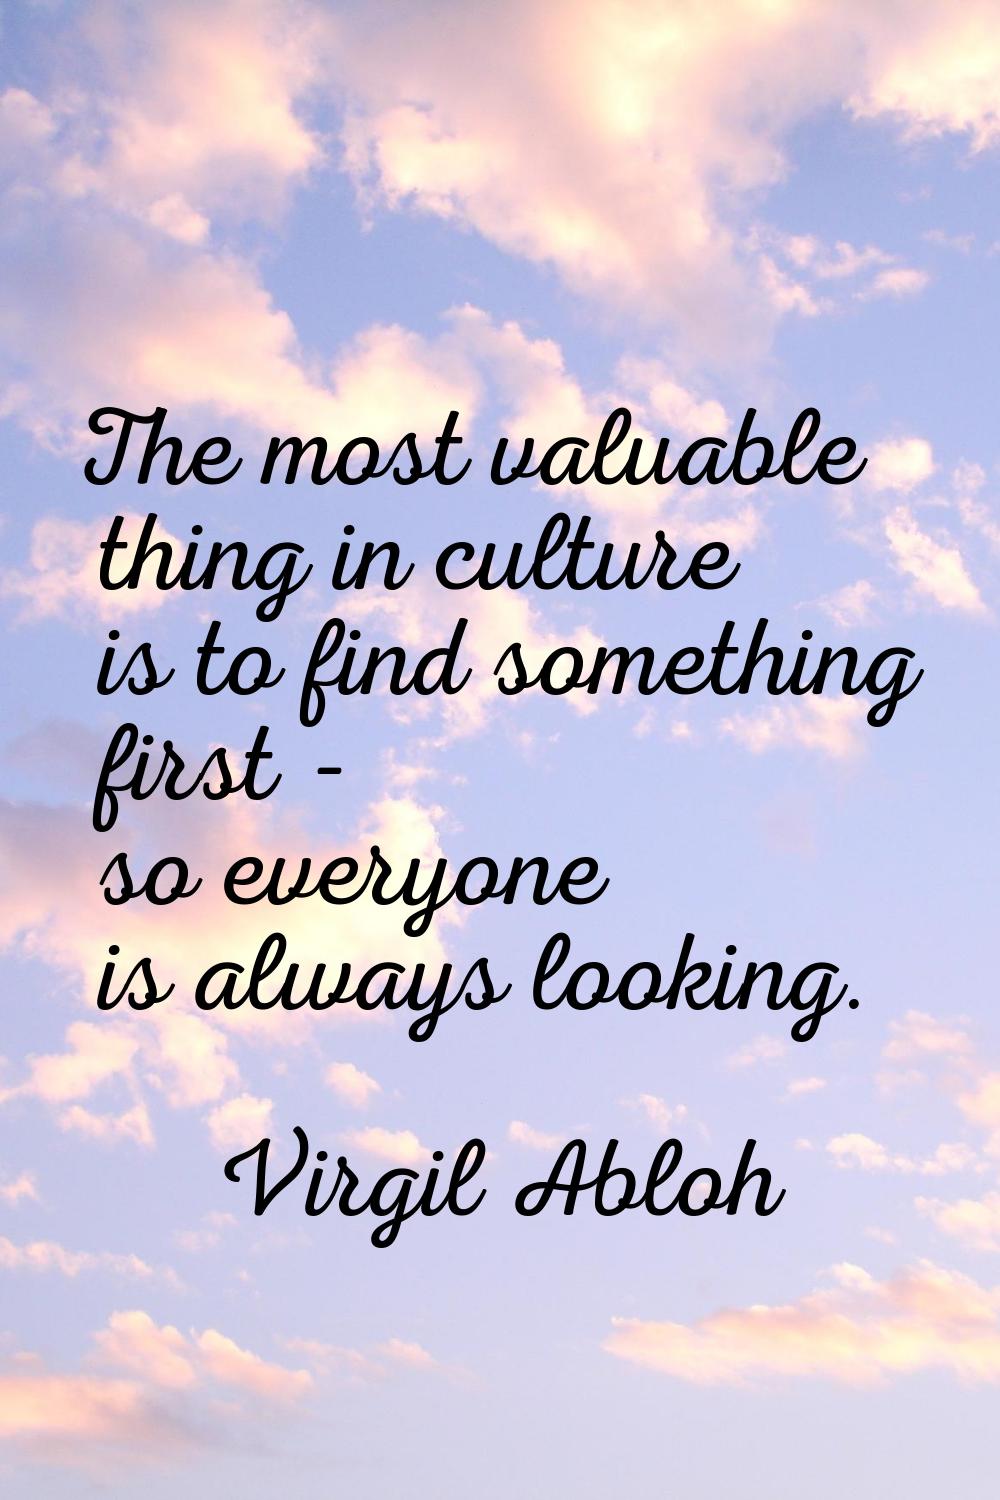 The most valuable thing in culture is to find something first - so everyone is always looking.